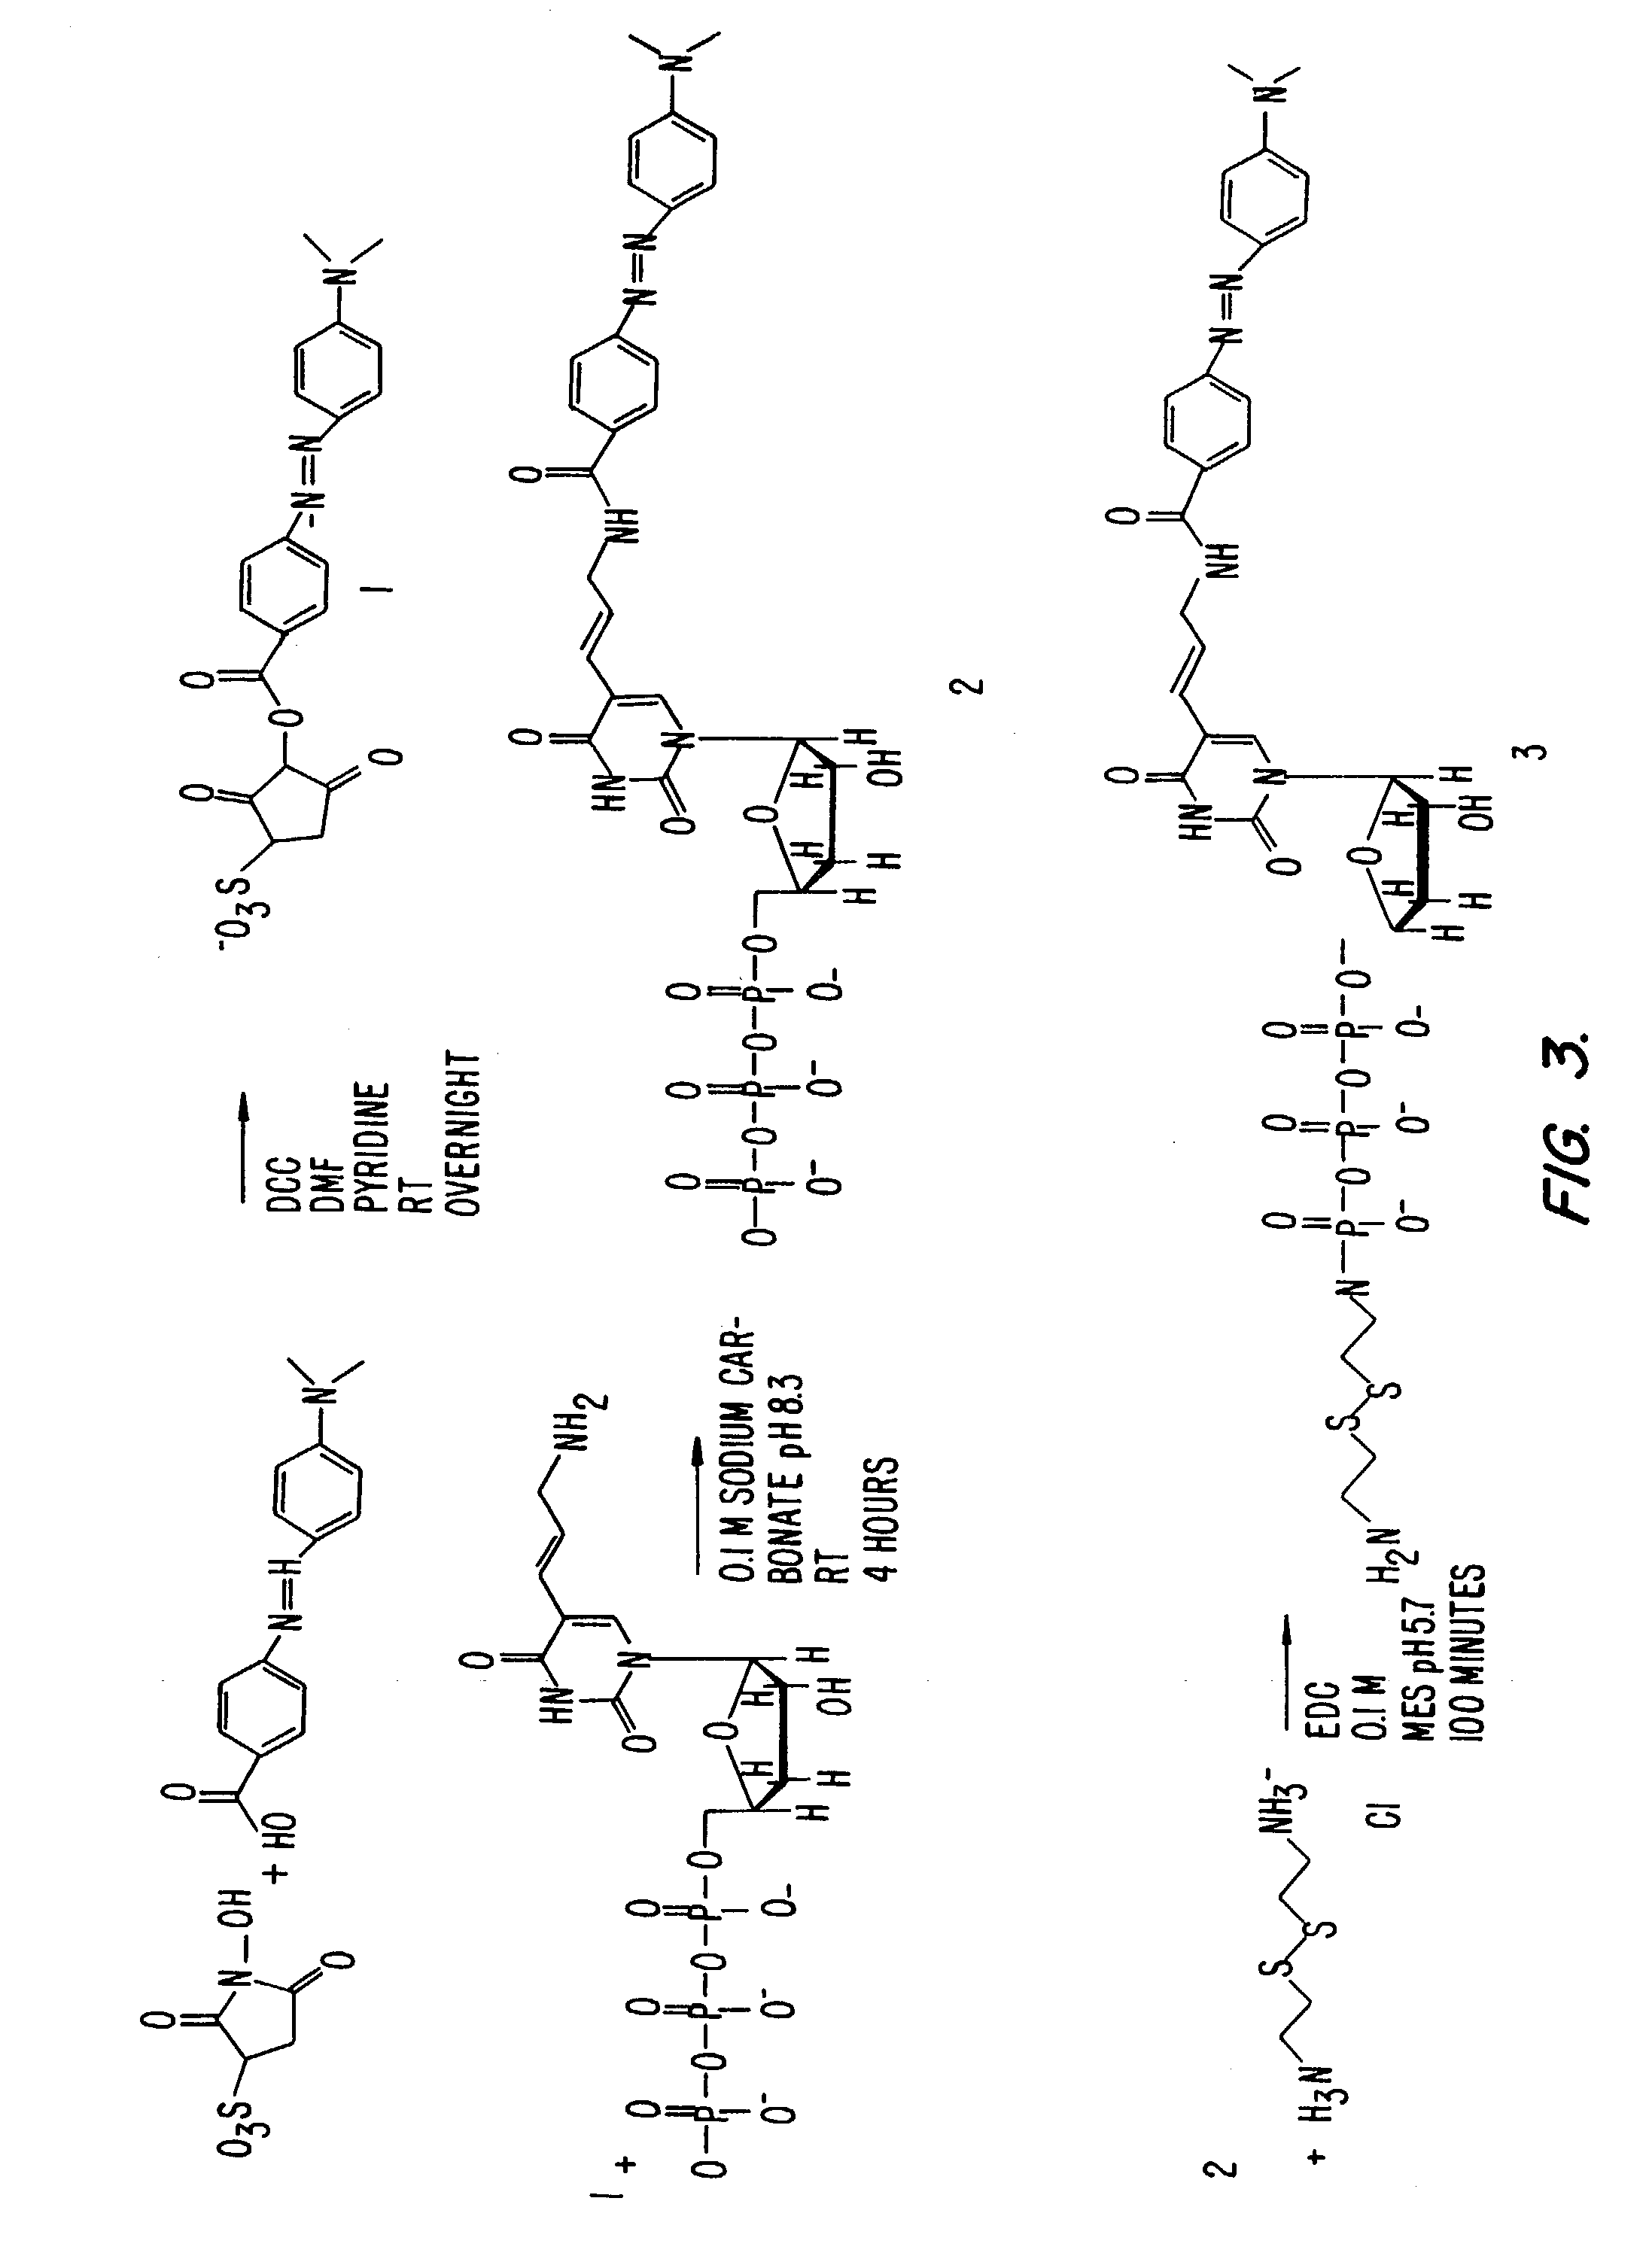 System and method for nucleic acid sequencing by polymerase synthesis